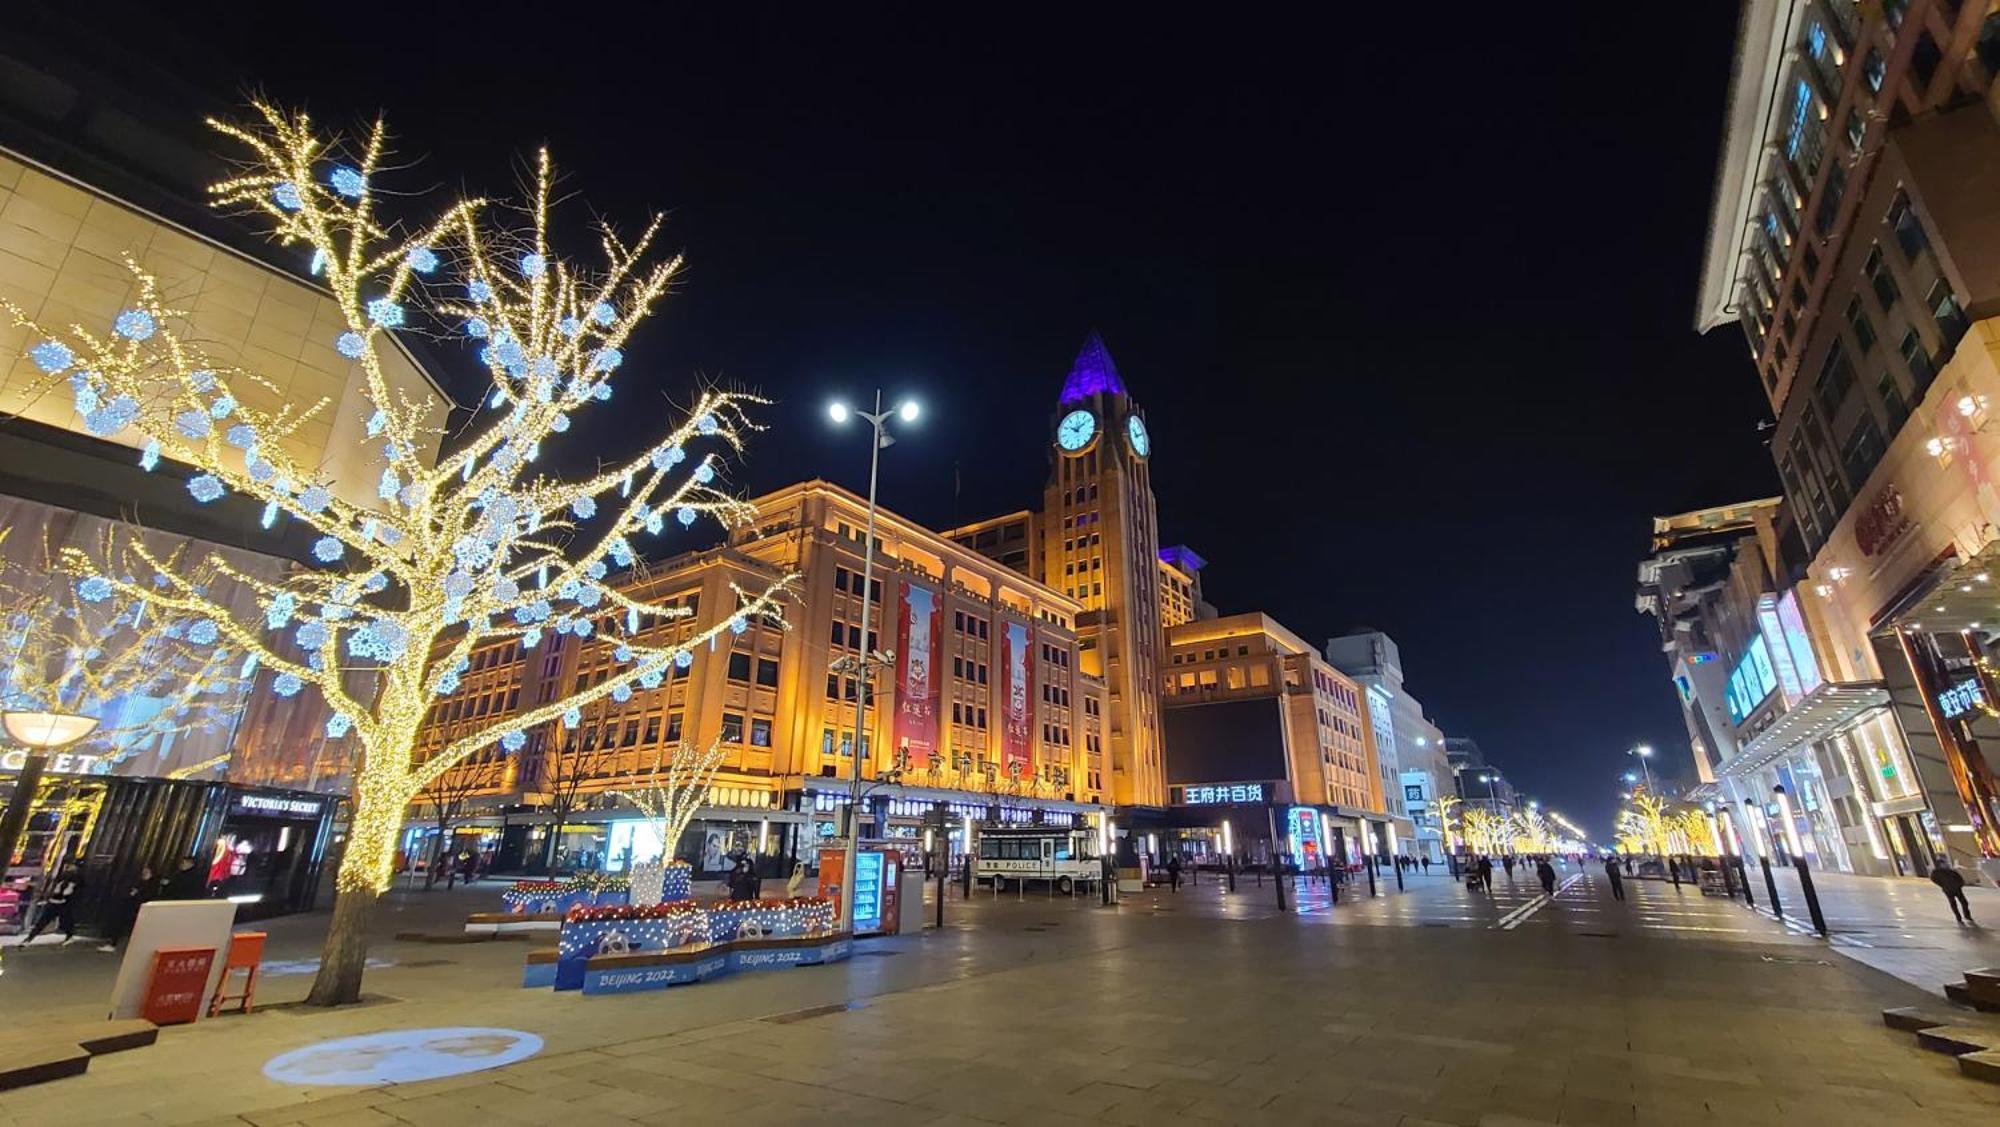 Happy Dragon City Culture Hotel -In The City Center With Ticket Service&Food Recommendation,Near Tian'Anmen Forbidden City,Wangfujing Walking Street,Easy To Get Any Tour Sights In Bắc Kinh Ngoại thất bức ảnh